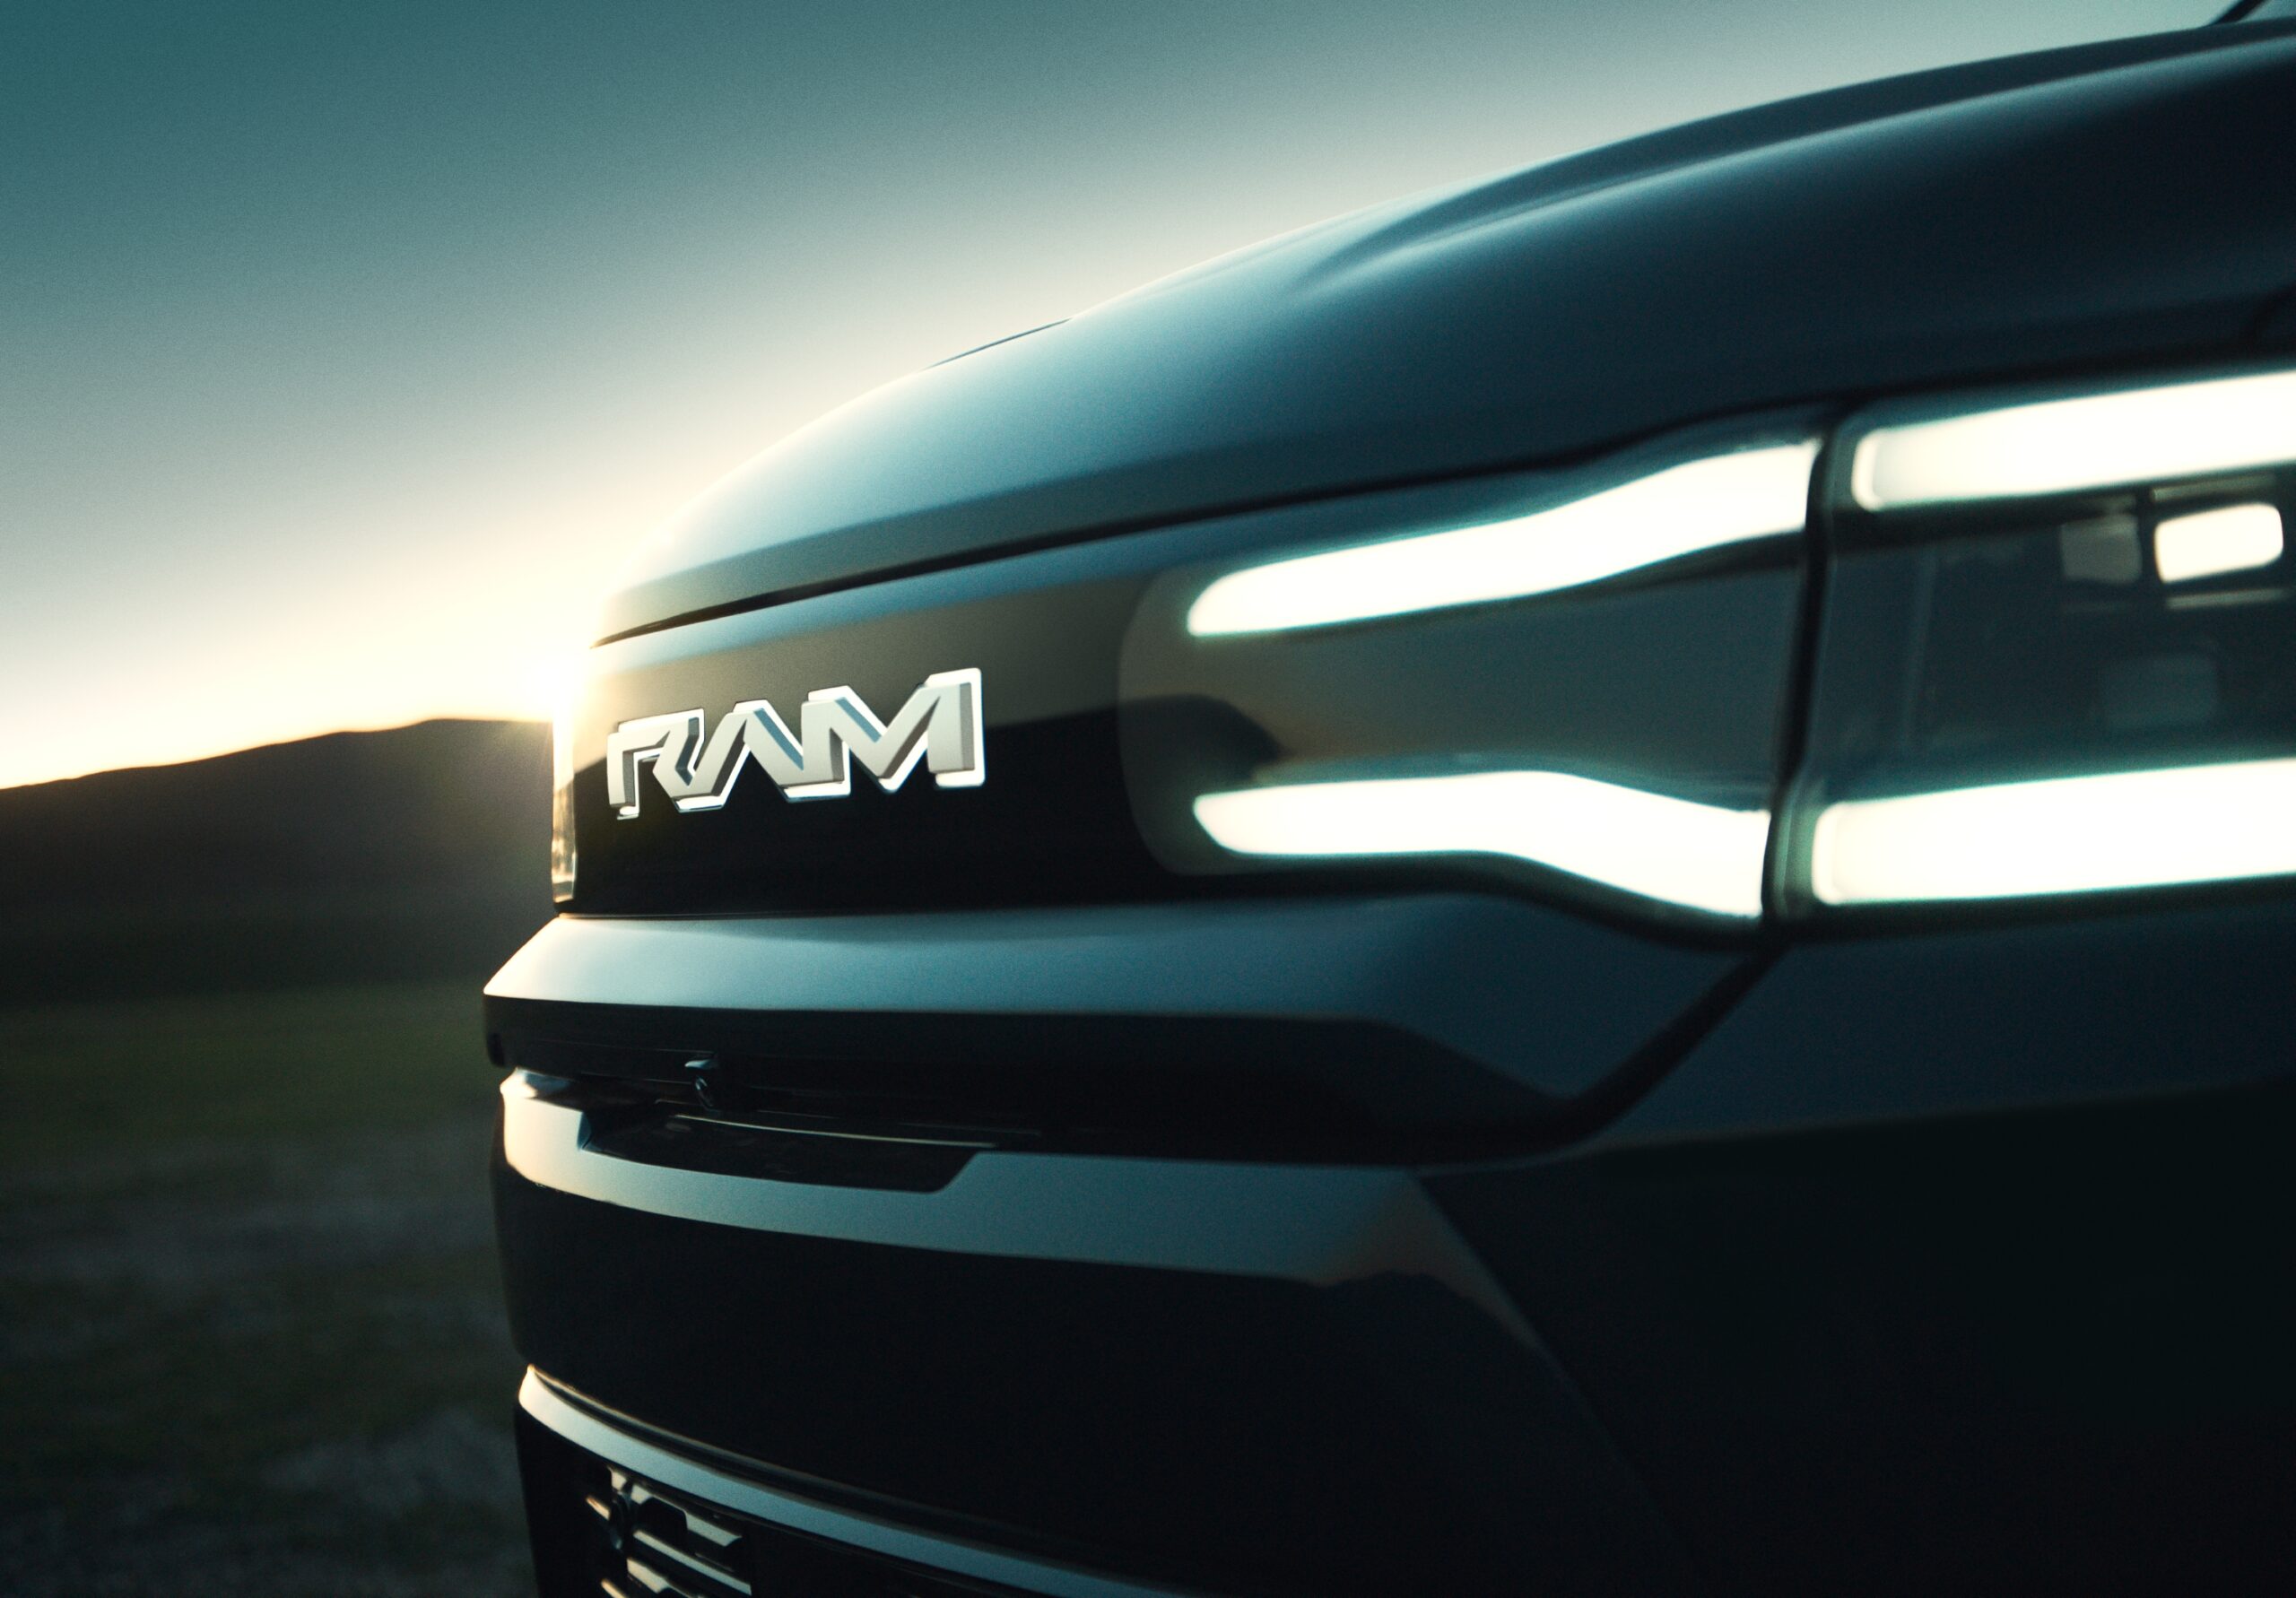 A teaser photo of the upcoming Ram 1500 REV